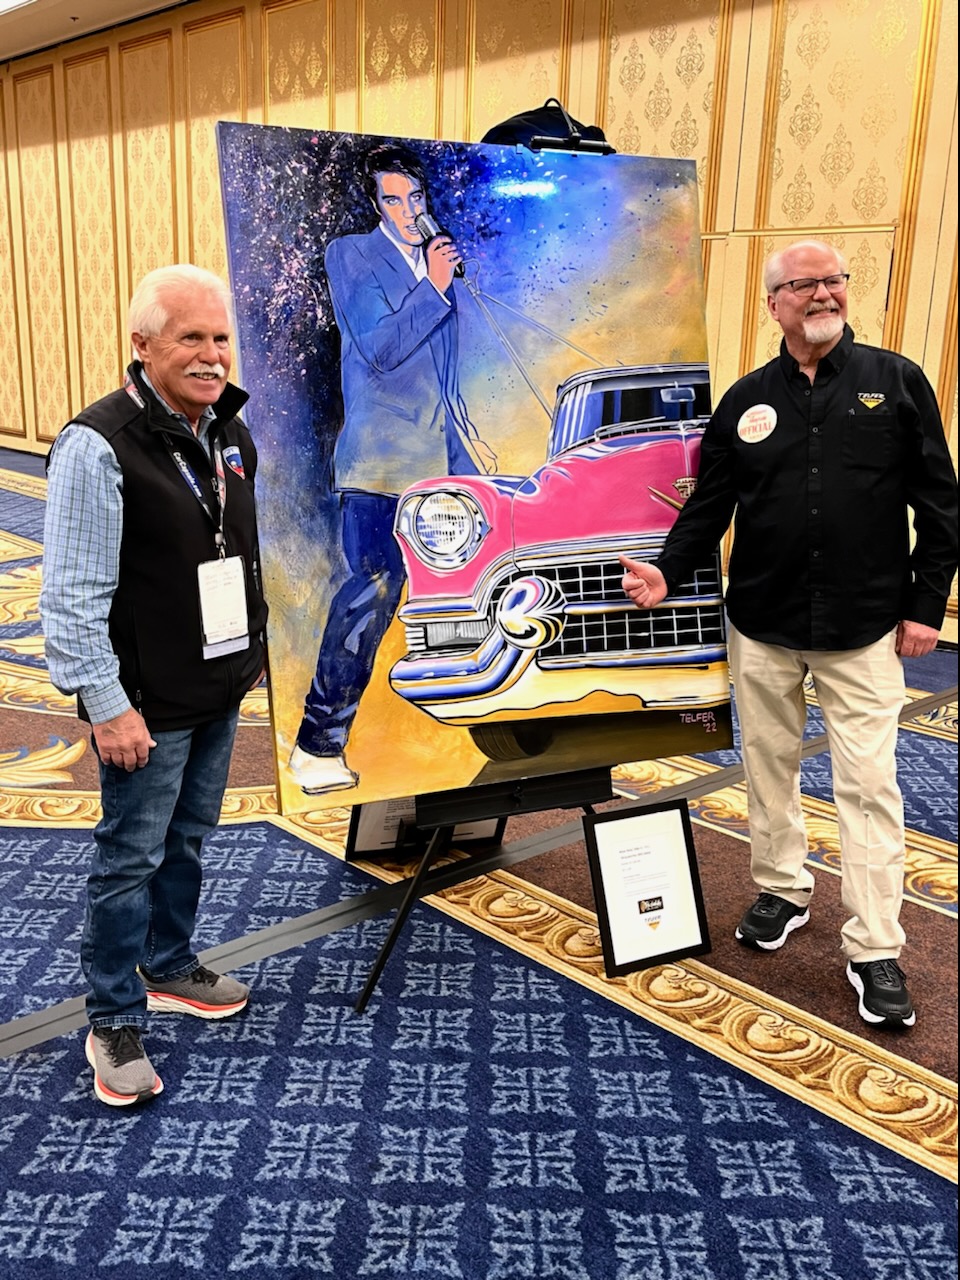 Wayne Carini from Chasing Classic Cars and artist Kelly Telfer pose next to the original “Elvis and His Cars” painting at the press conference during SEMA 2022